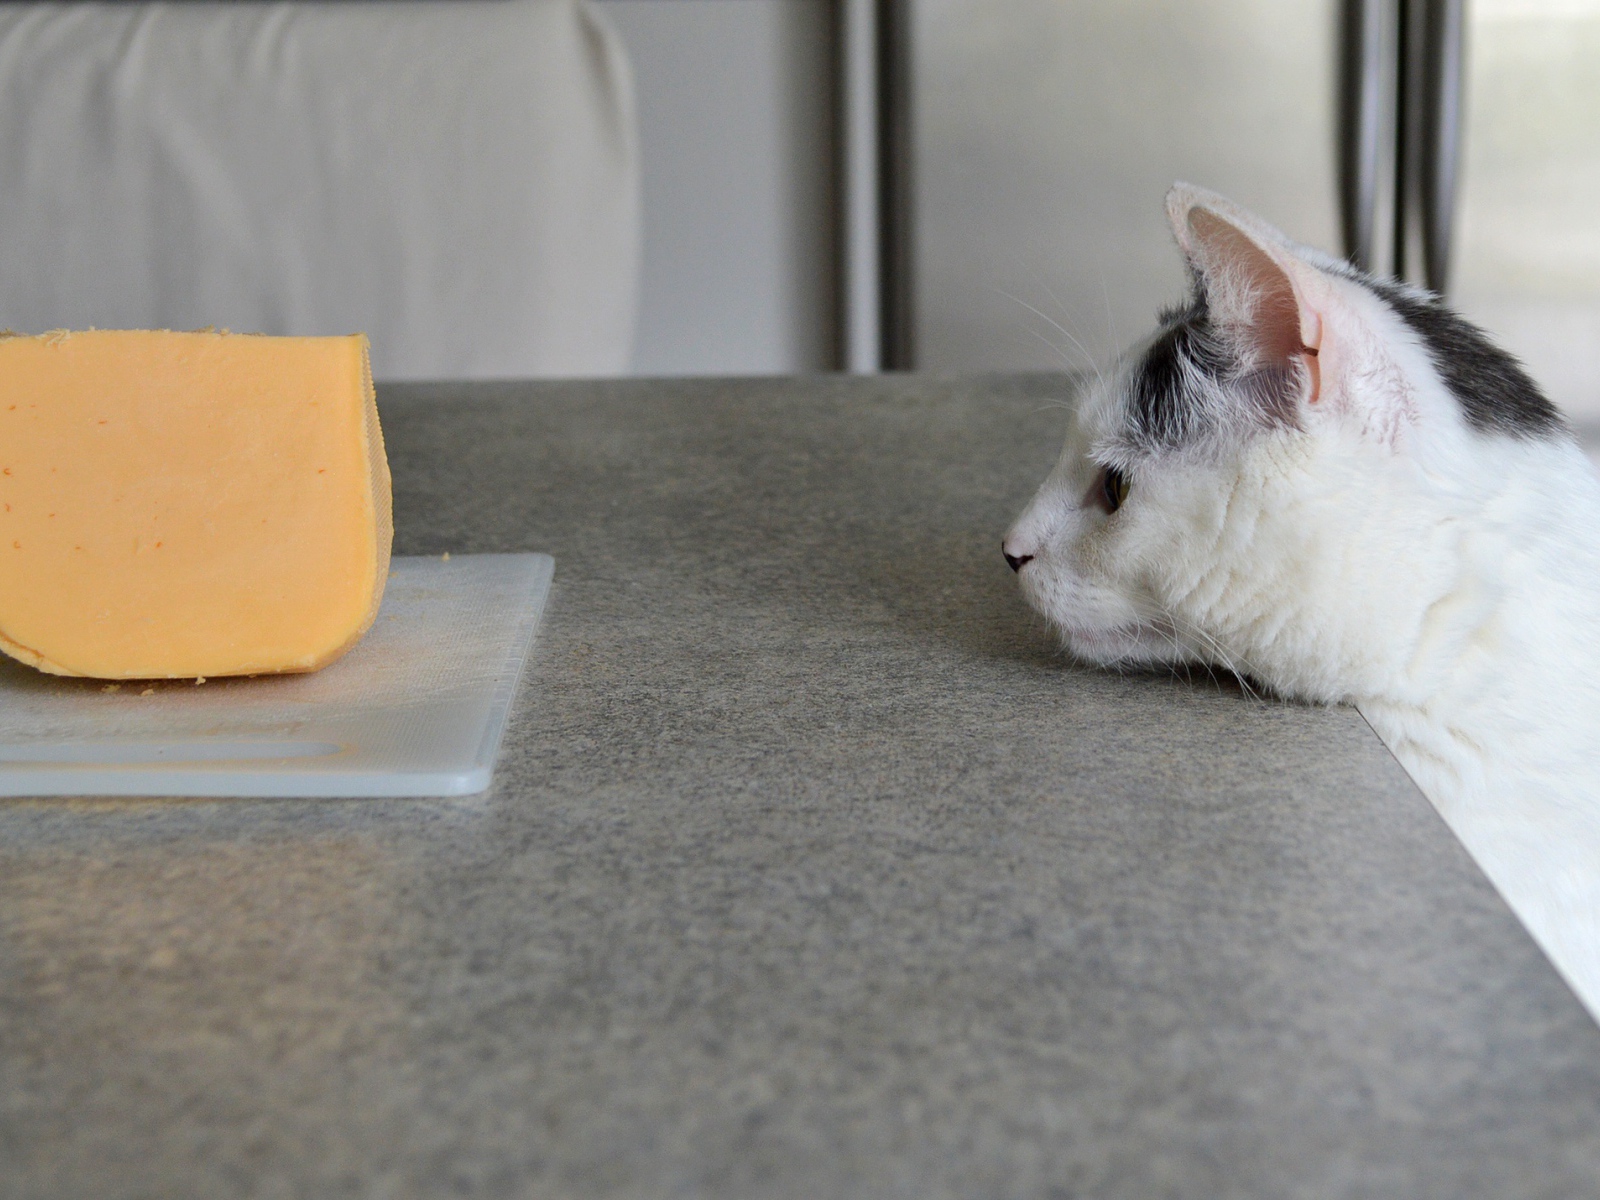 The cat looks at a piece of cheese on the table